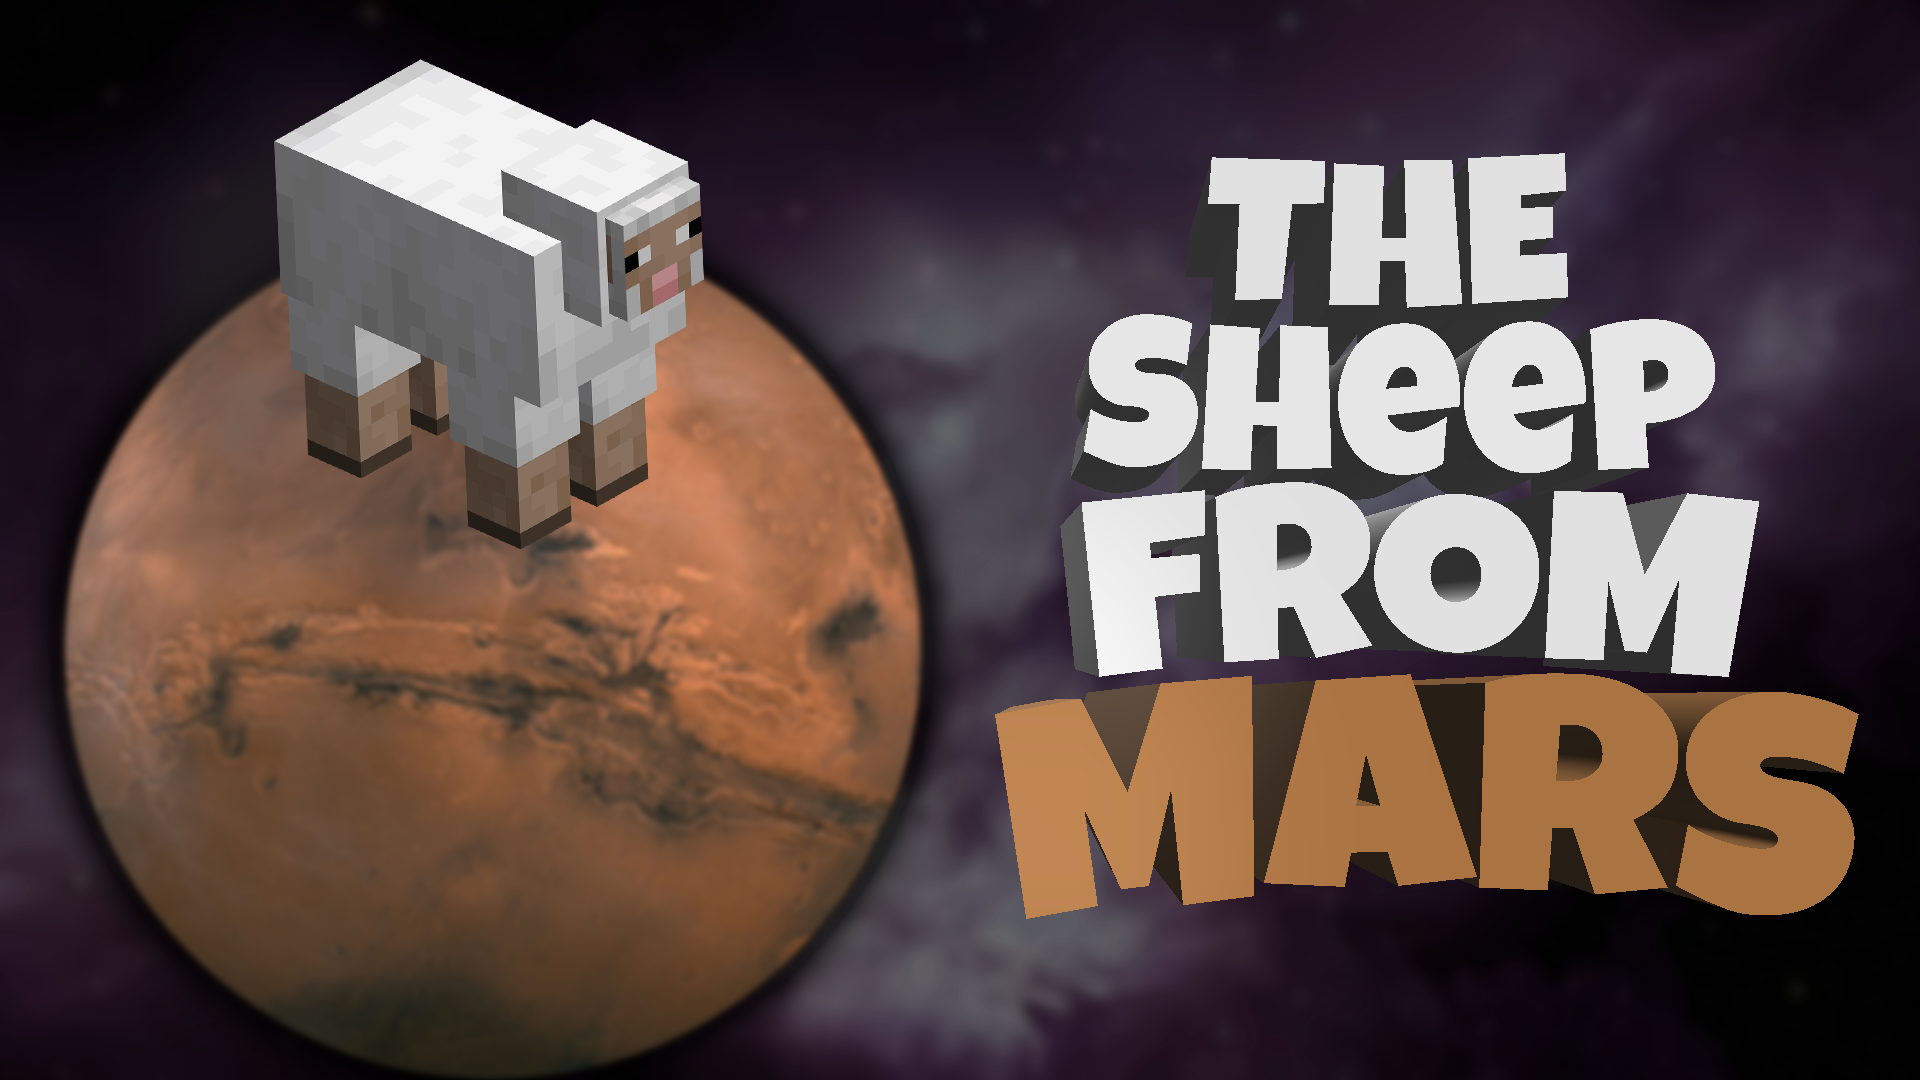 Download The Sheep From Mars 1.0 for Minecraft 1.17.1